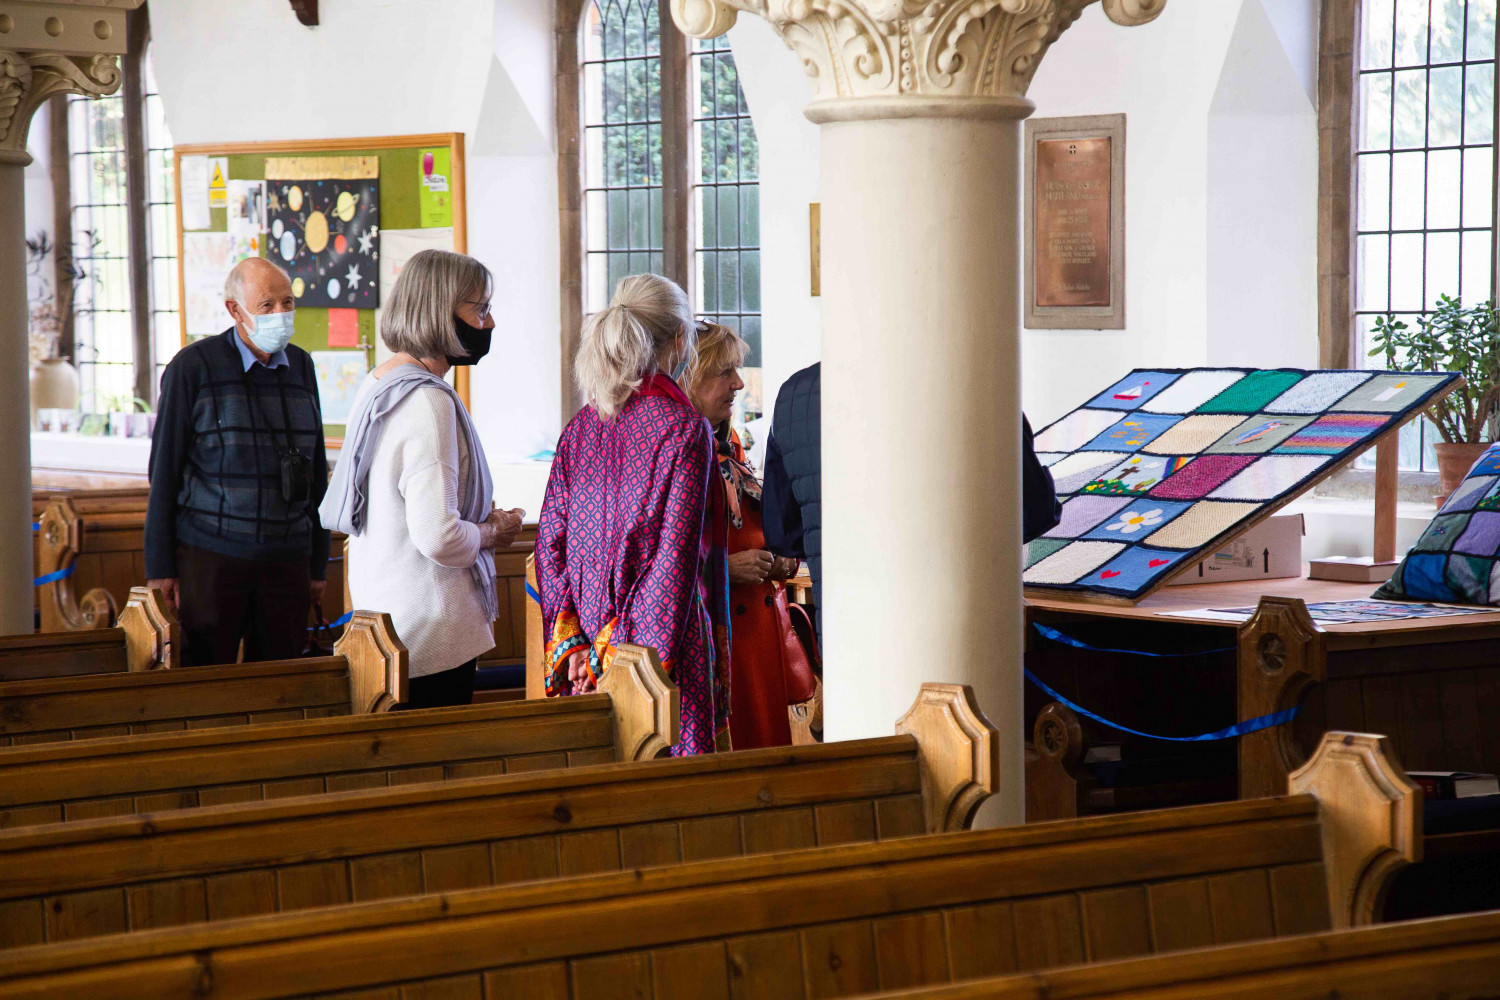 People looking at a knitted quilt in a church